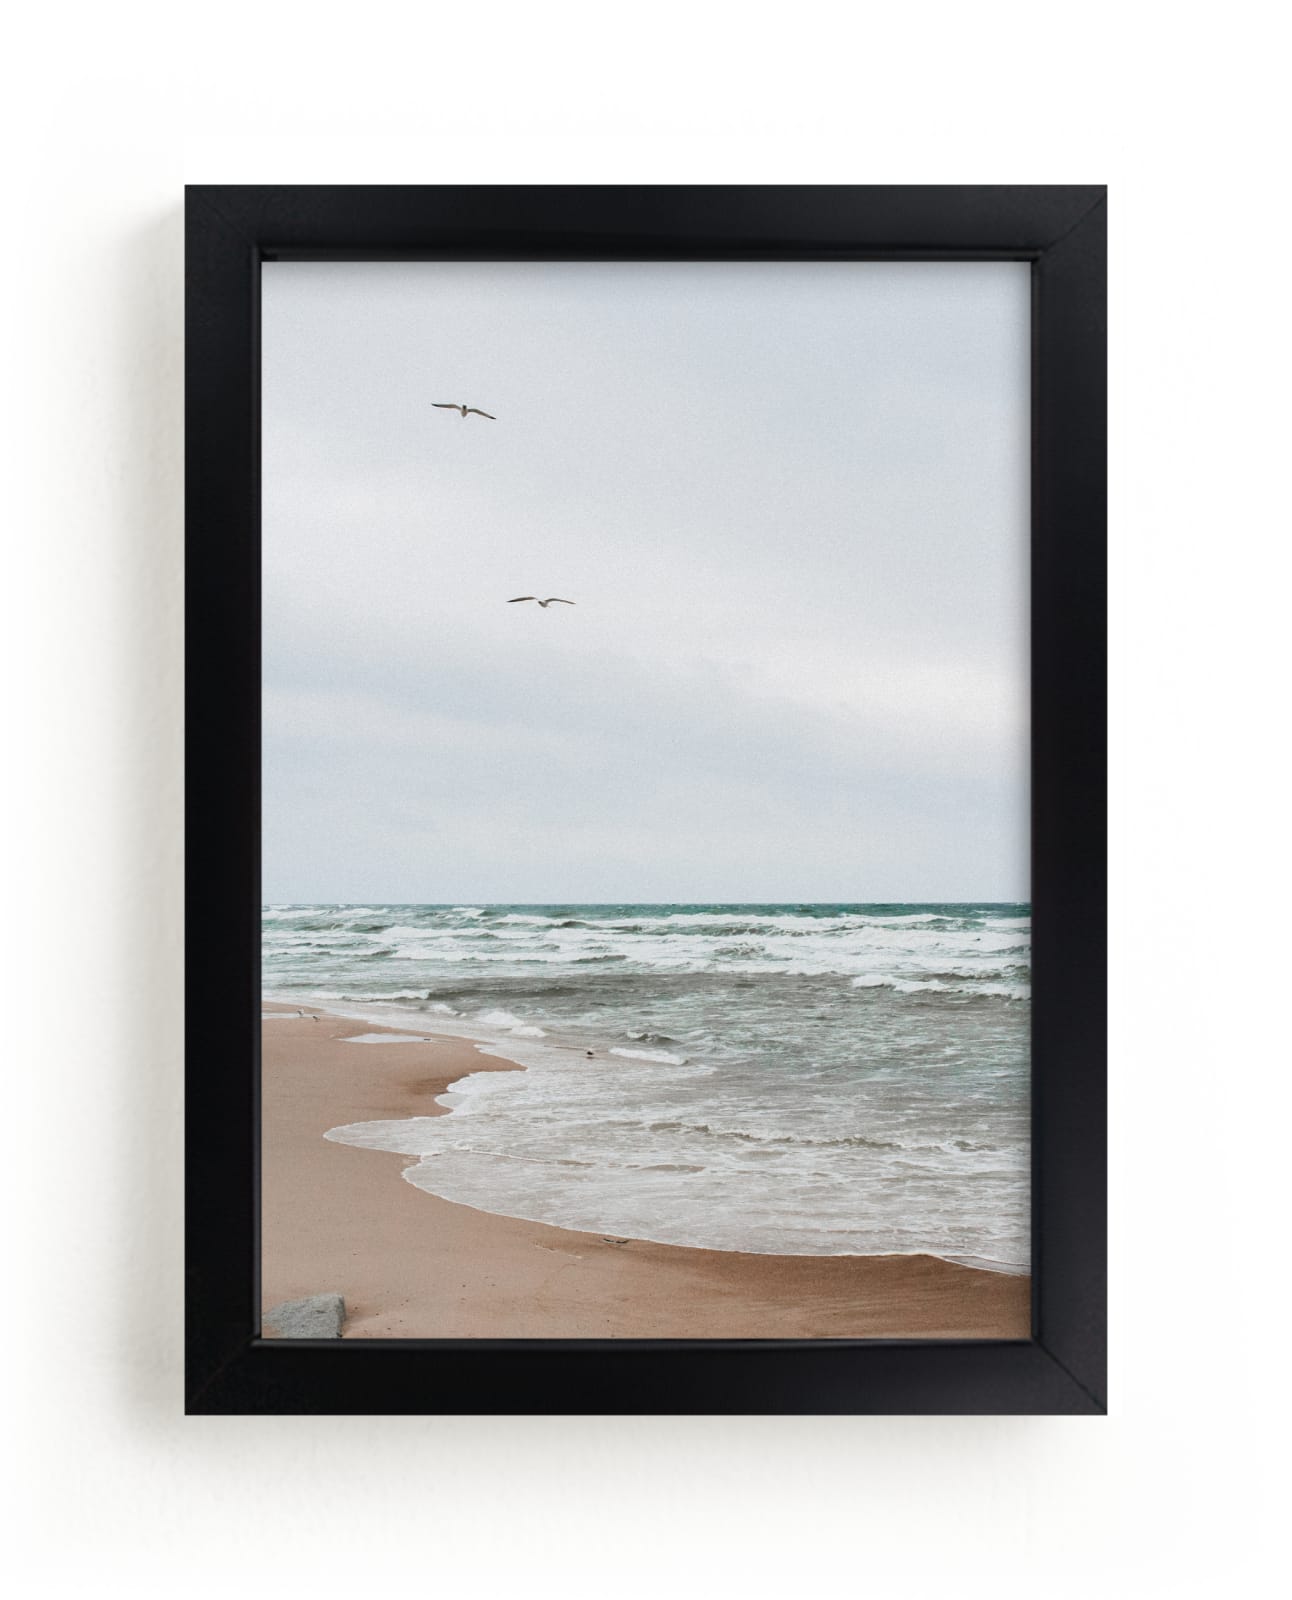 "White wave and bird" by Lying on the grass in beautiful frame options and a variety of sizes.